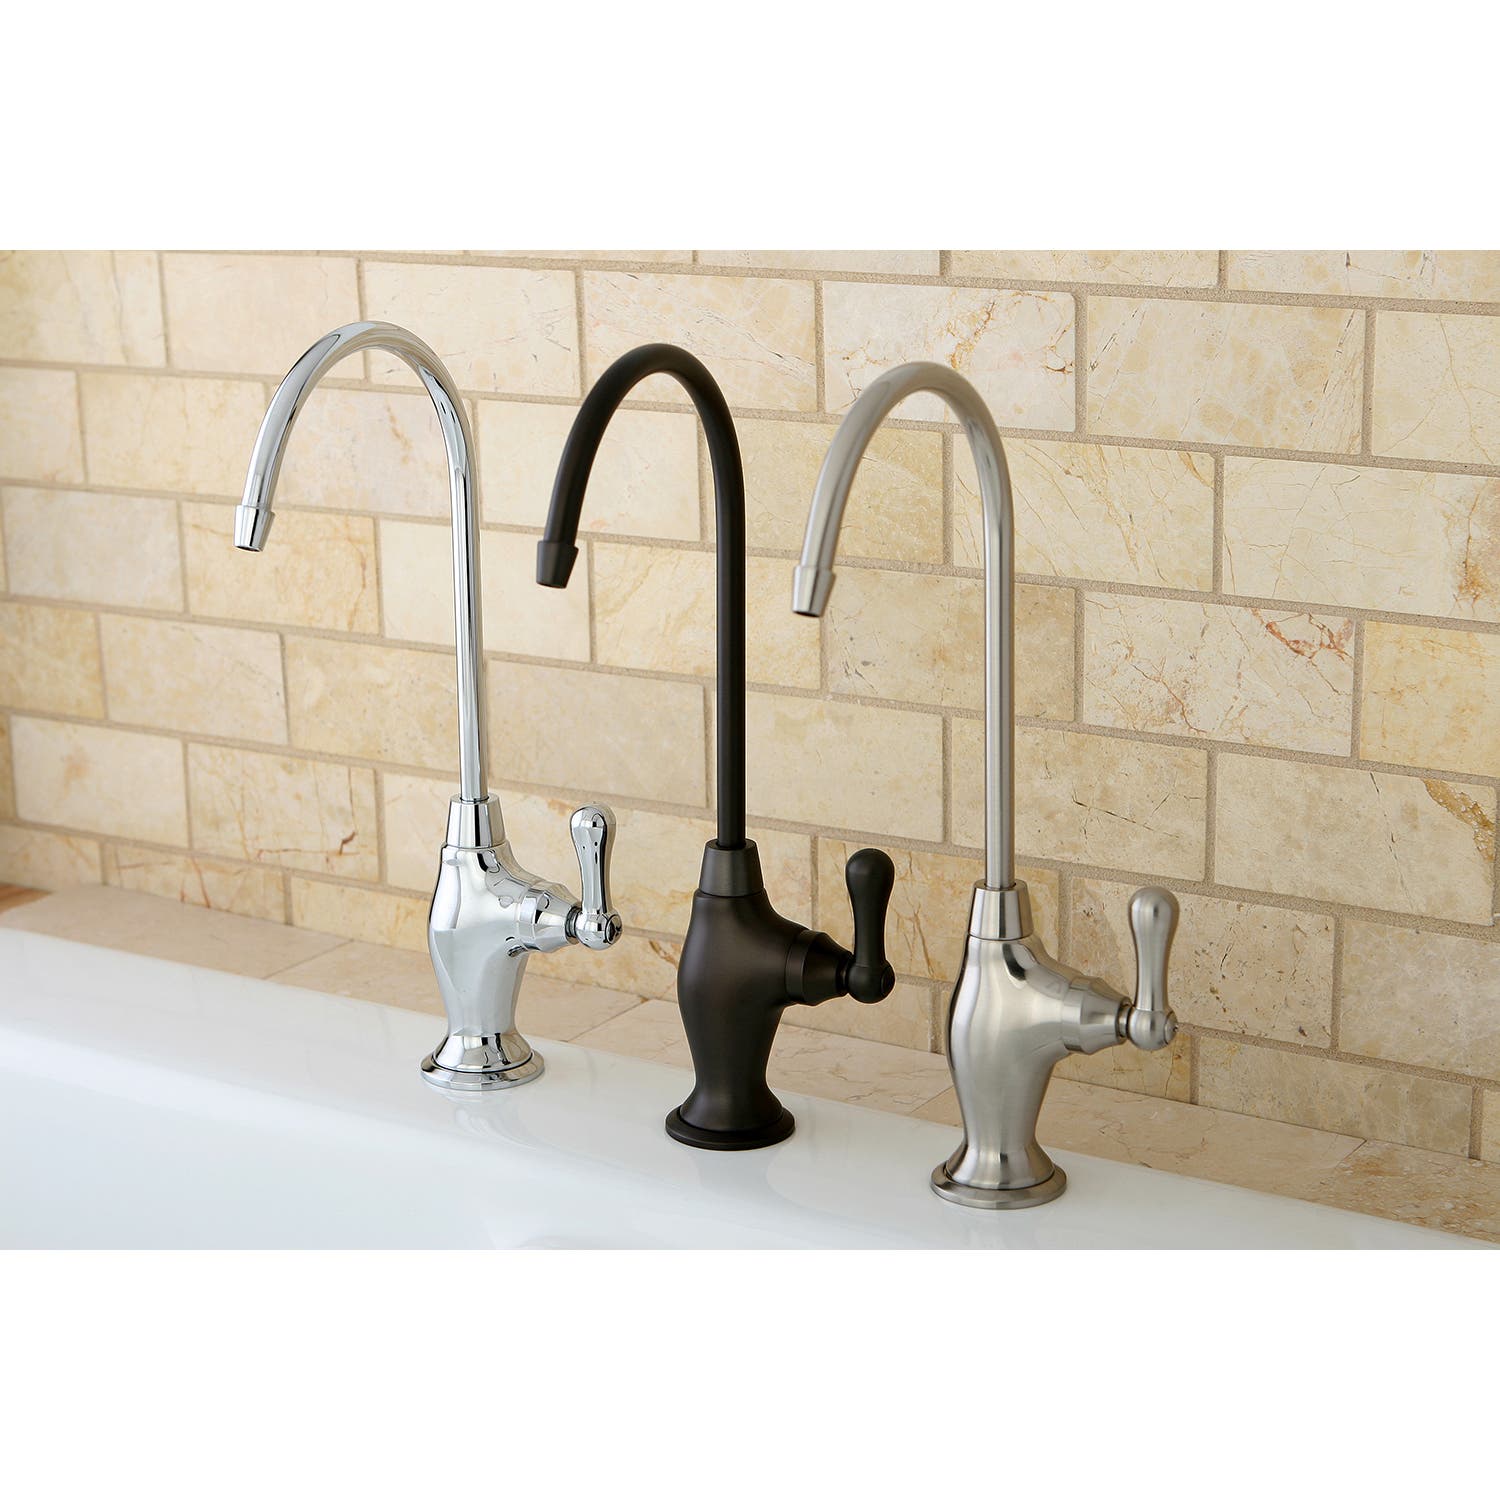 Kitchen Faucet 411 #3: Water Filtration Faucets